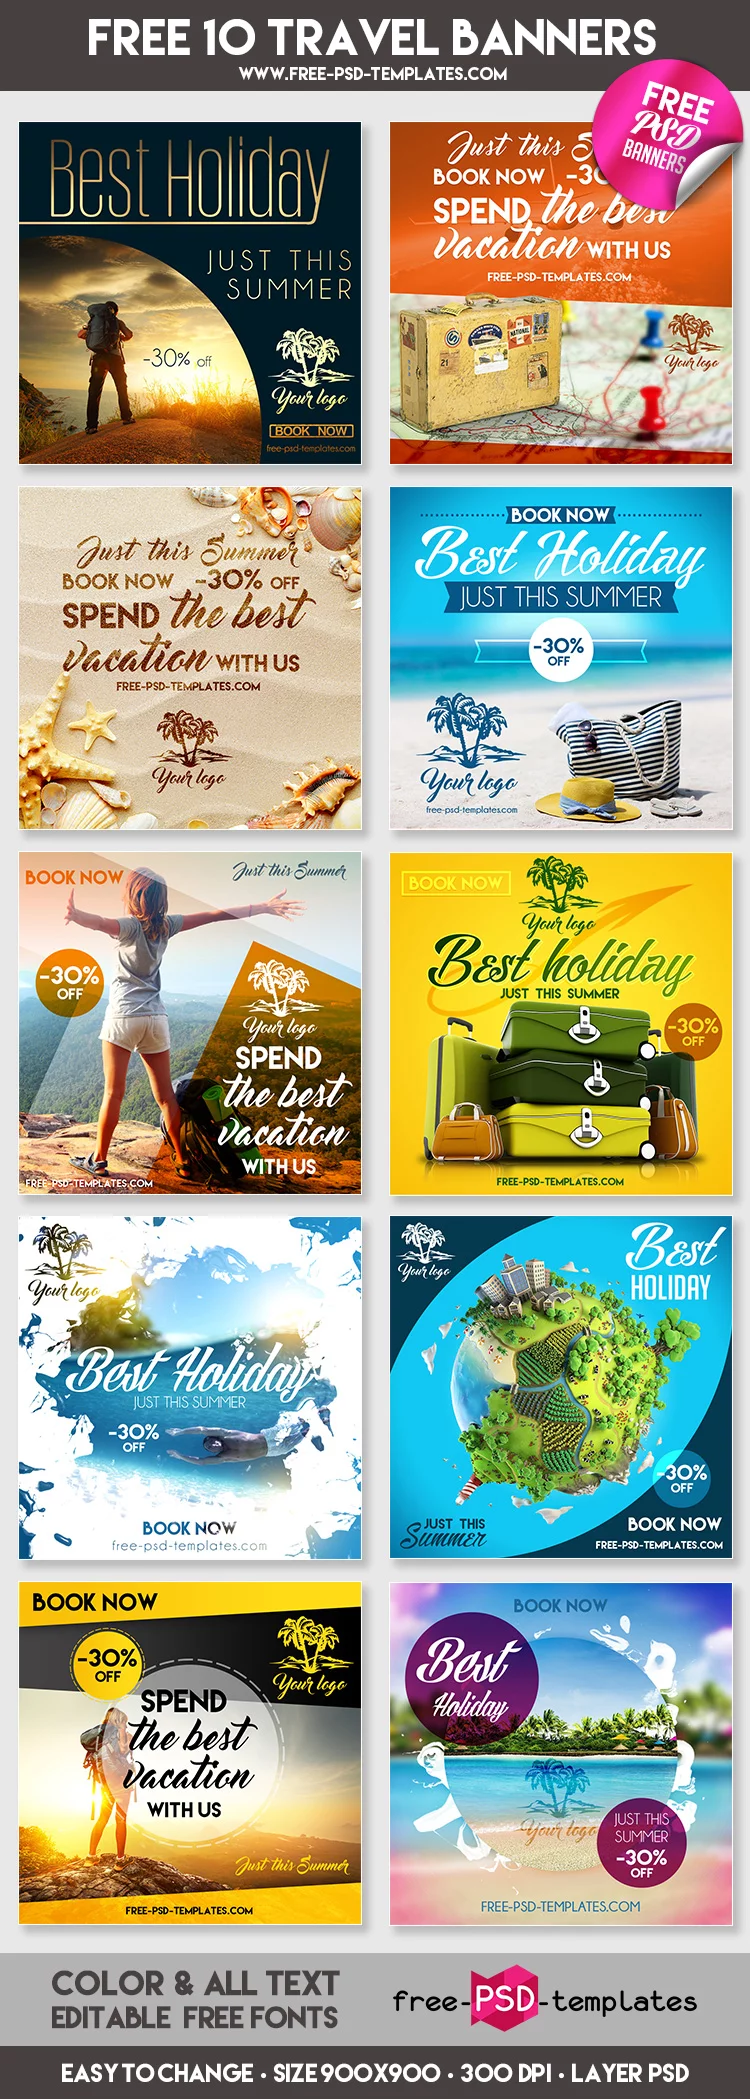 Preview_Free_Travel_Banners